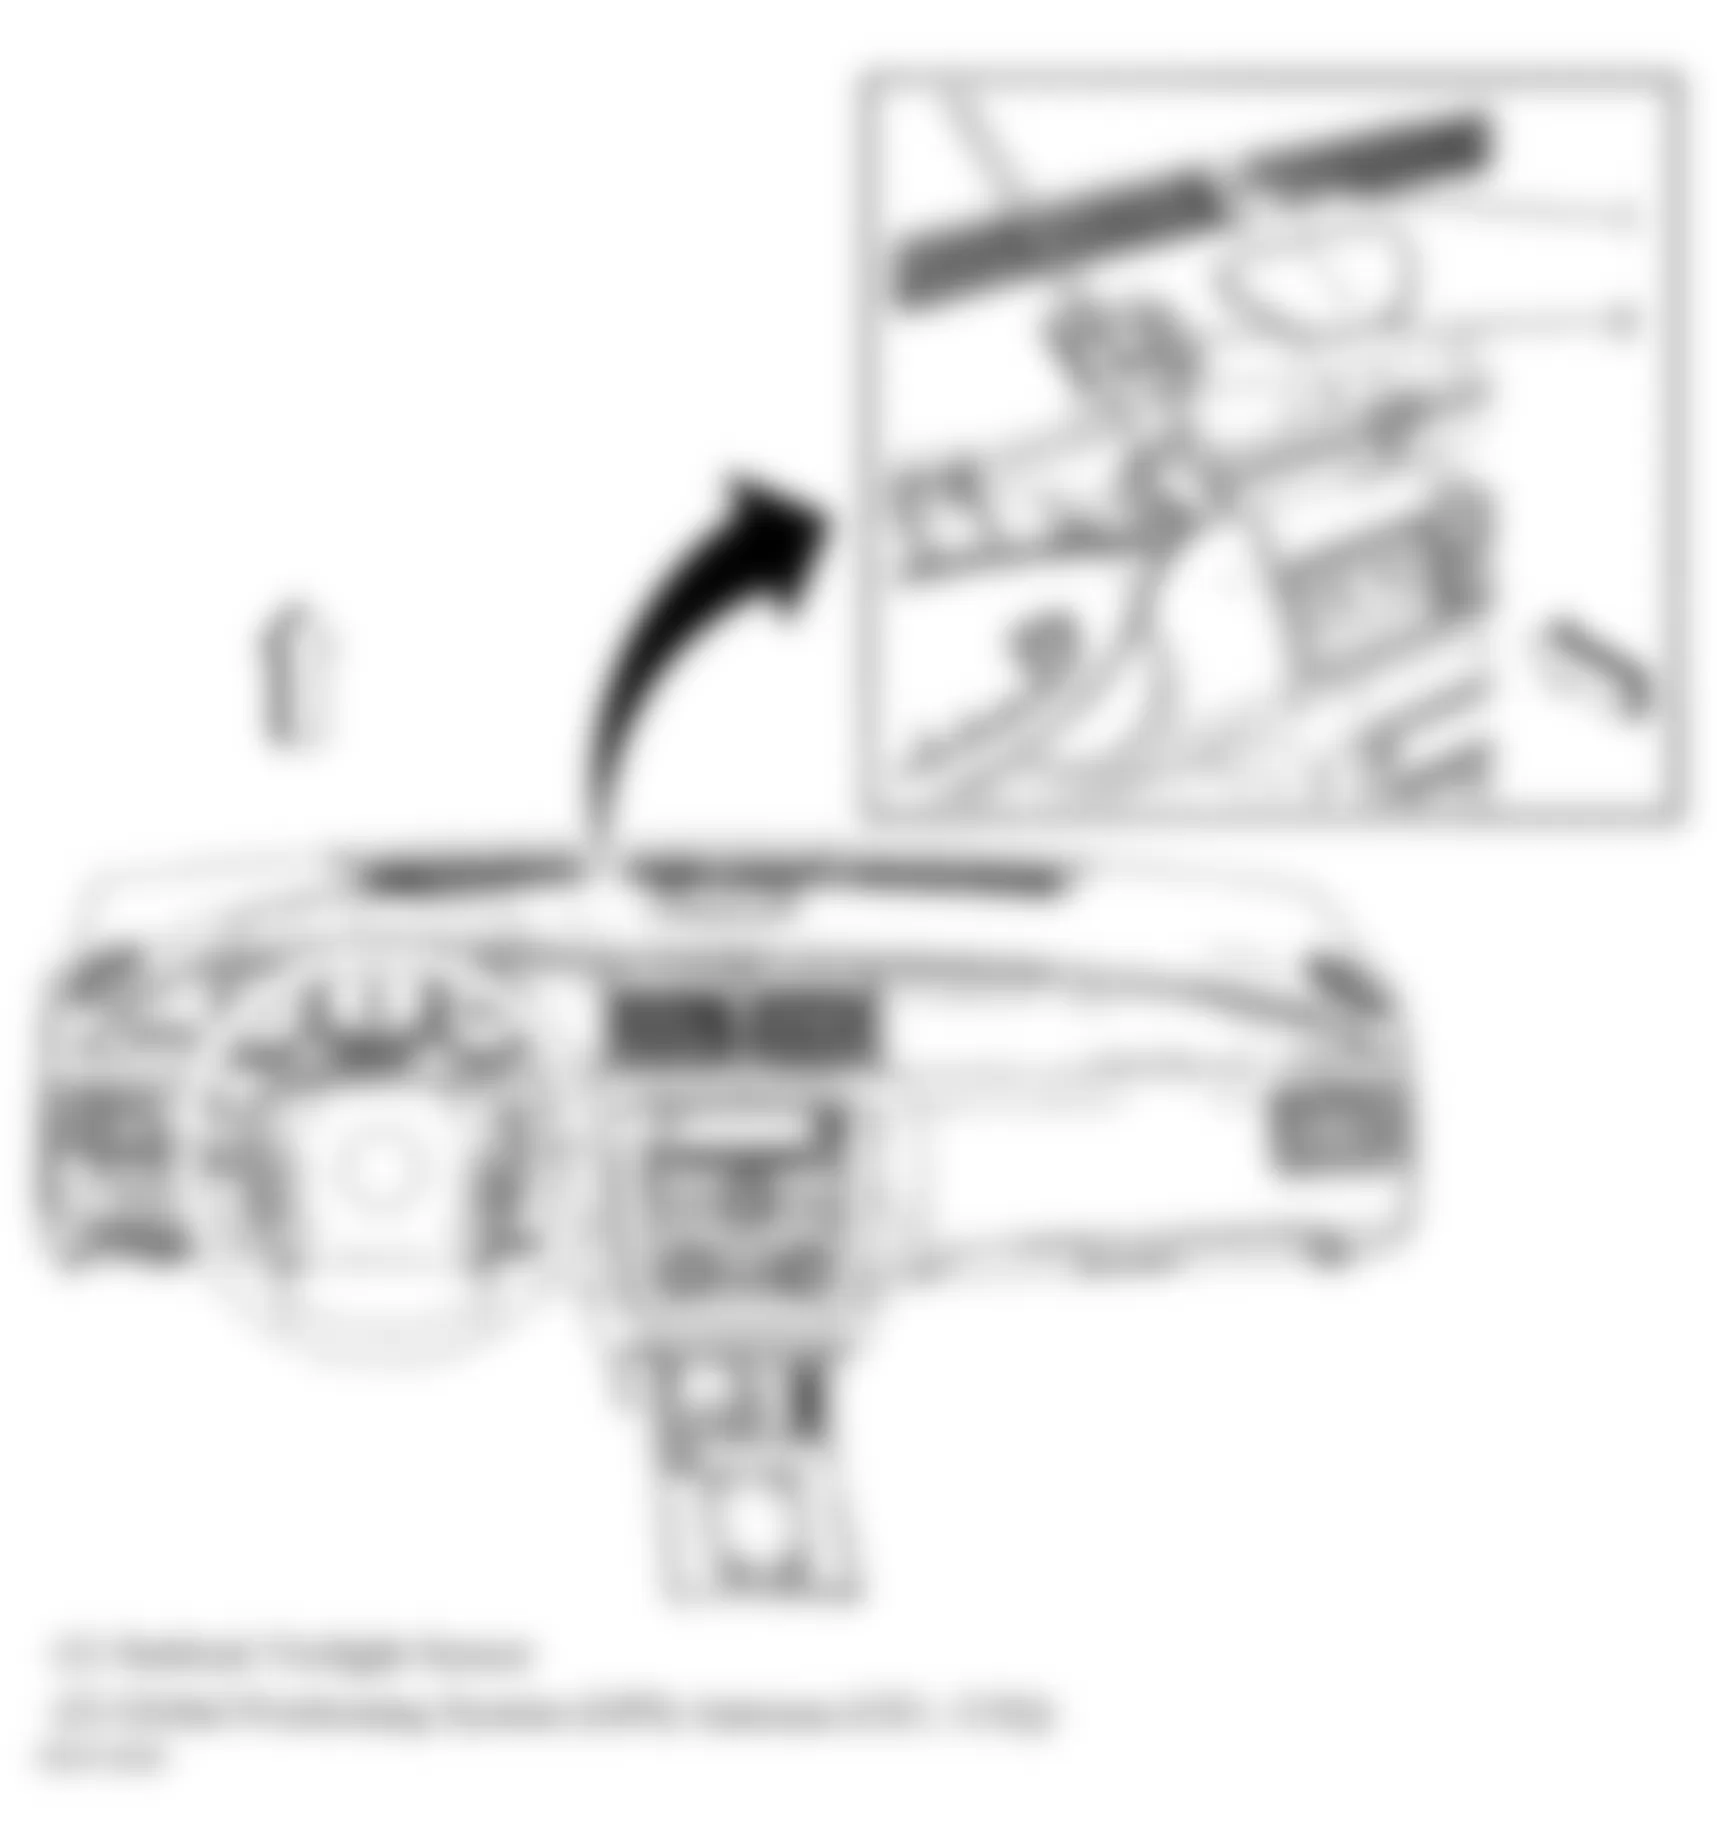 Buick Lucerne Super 2009 - Component Locations -  Top Center Of Dash